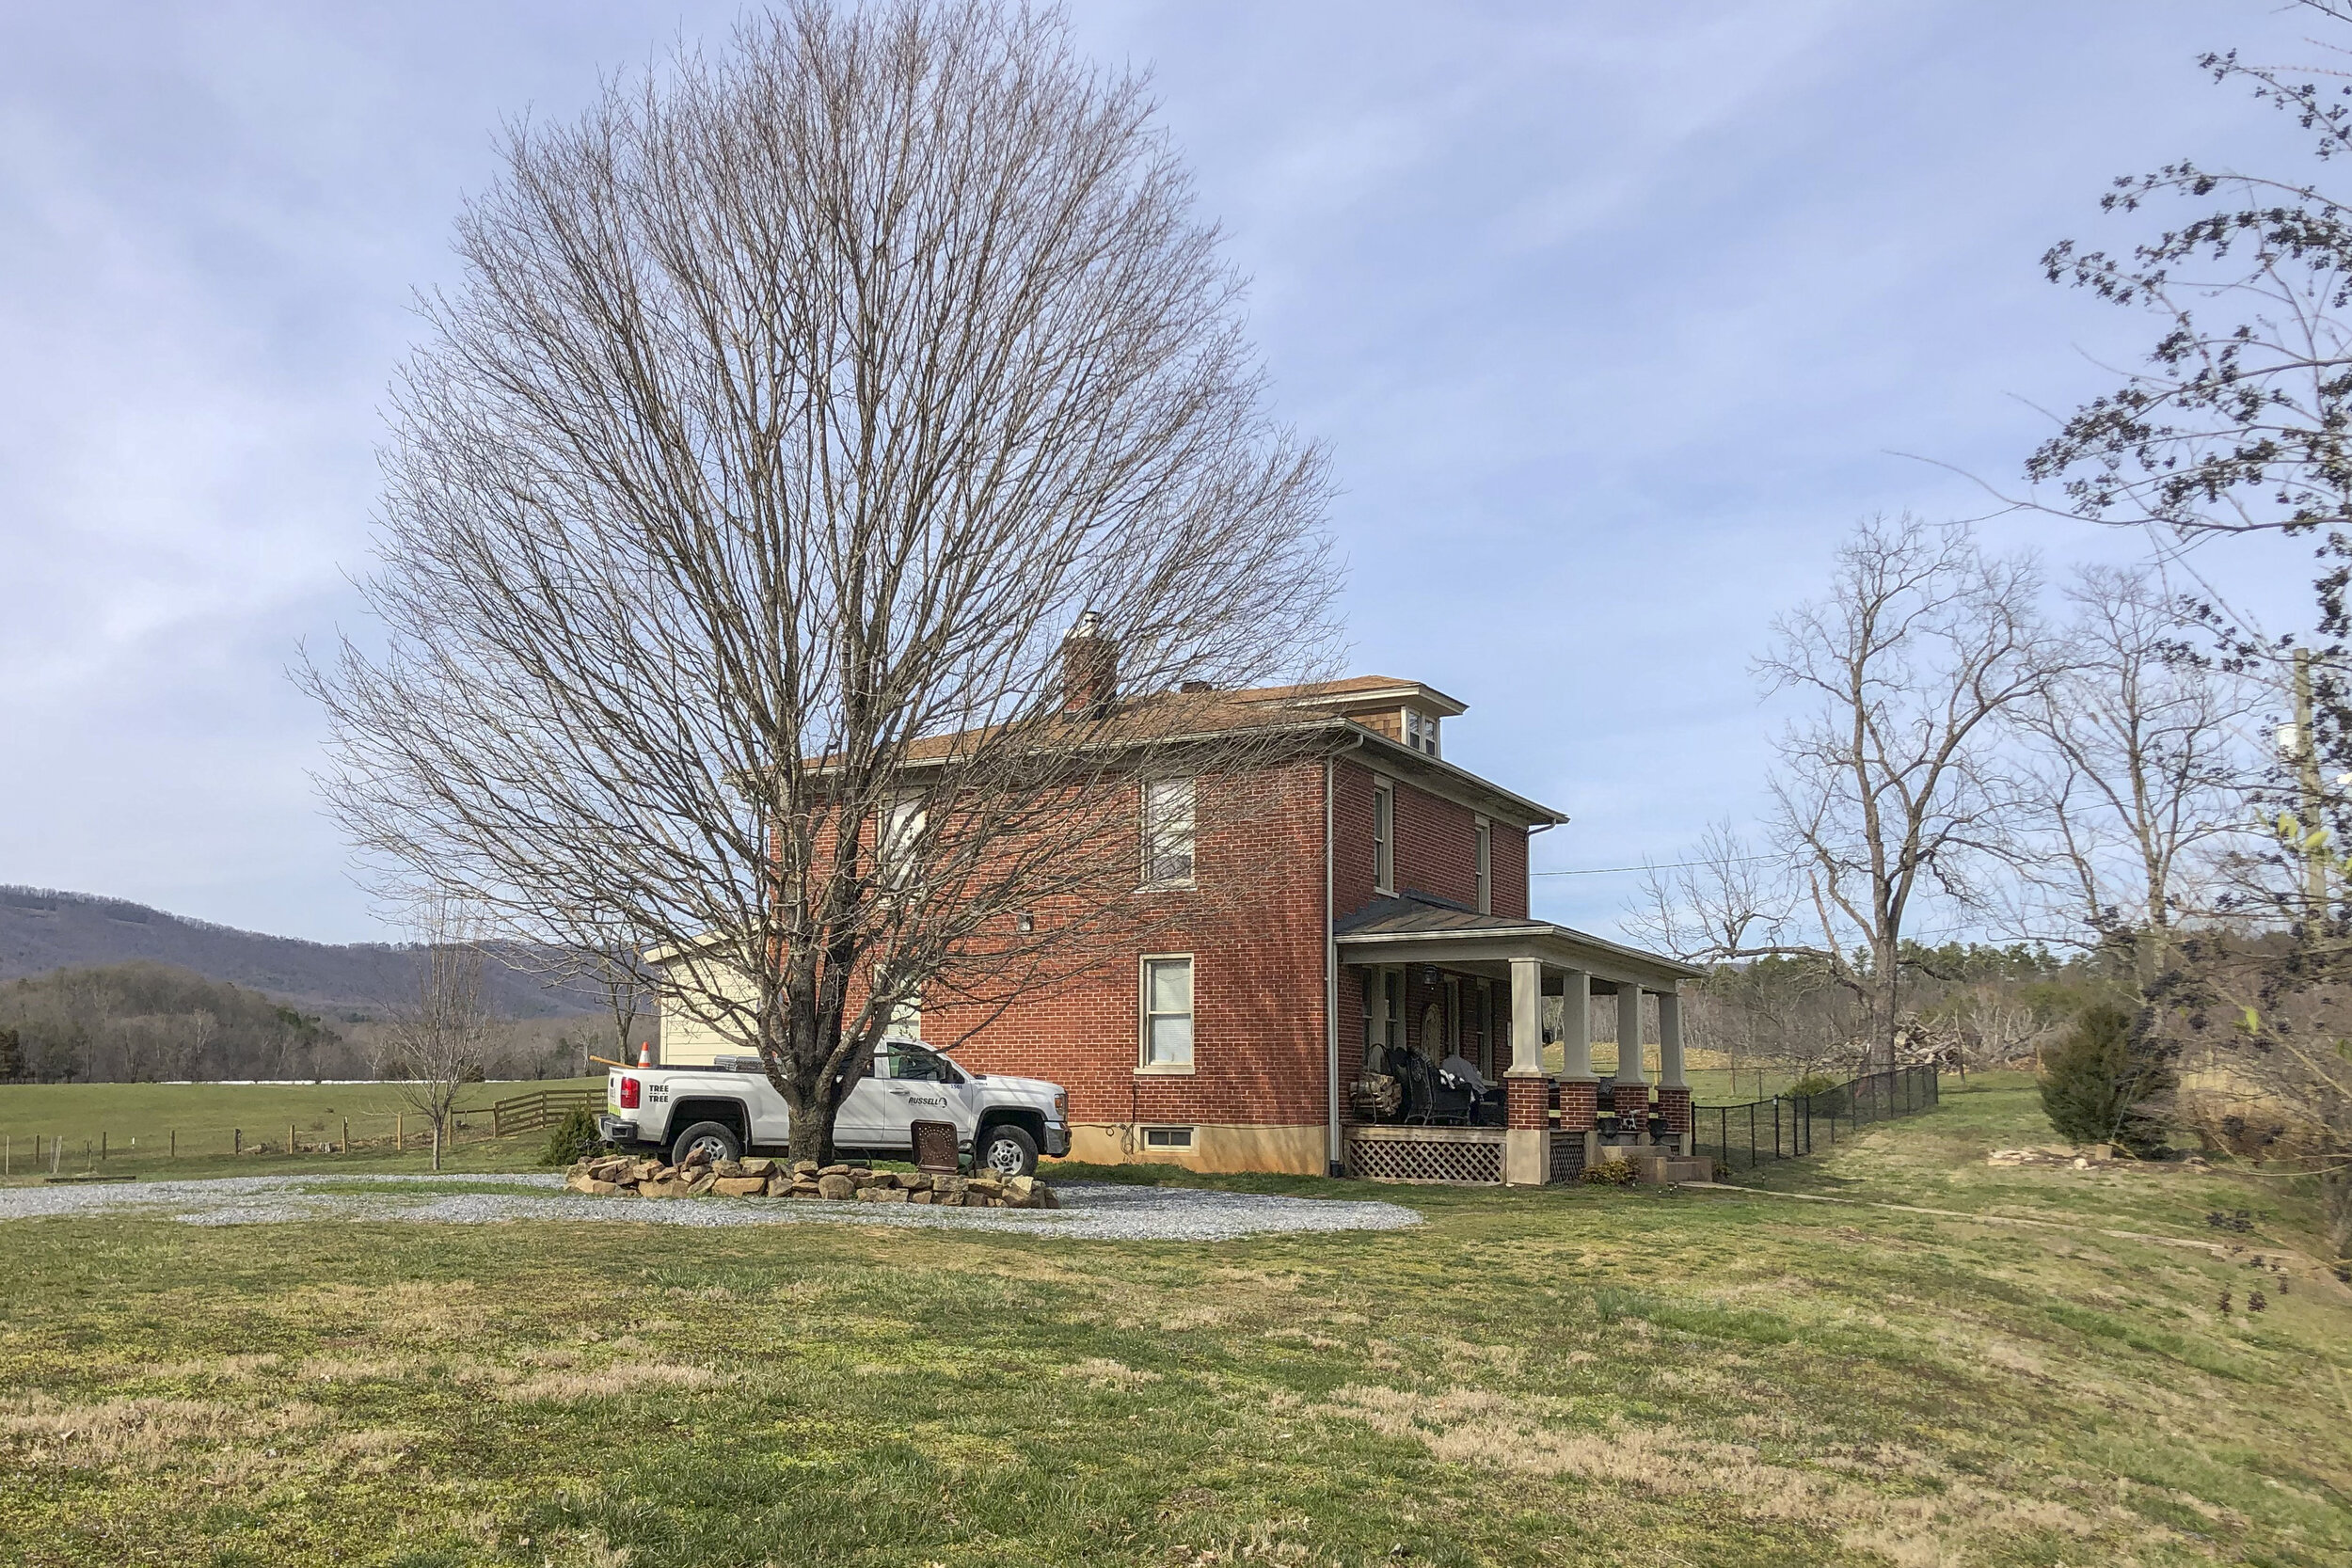  Our 1917 farmhouse on the 700 acre Cypher Ridge cattle Farm in Montvale, Virginia. This has been home to several of my colleagues for the better half of the Blue Ridge project. It was not unusual to come home to a couple of cows in the front yard. 